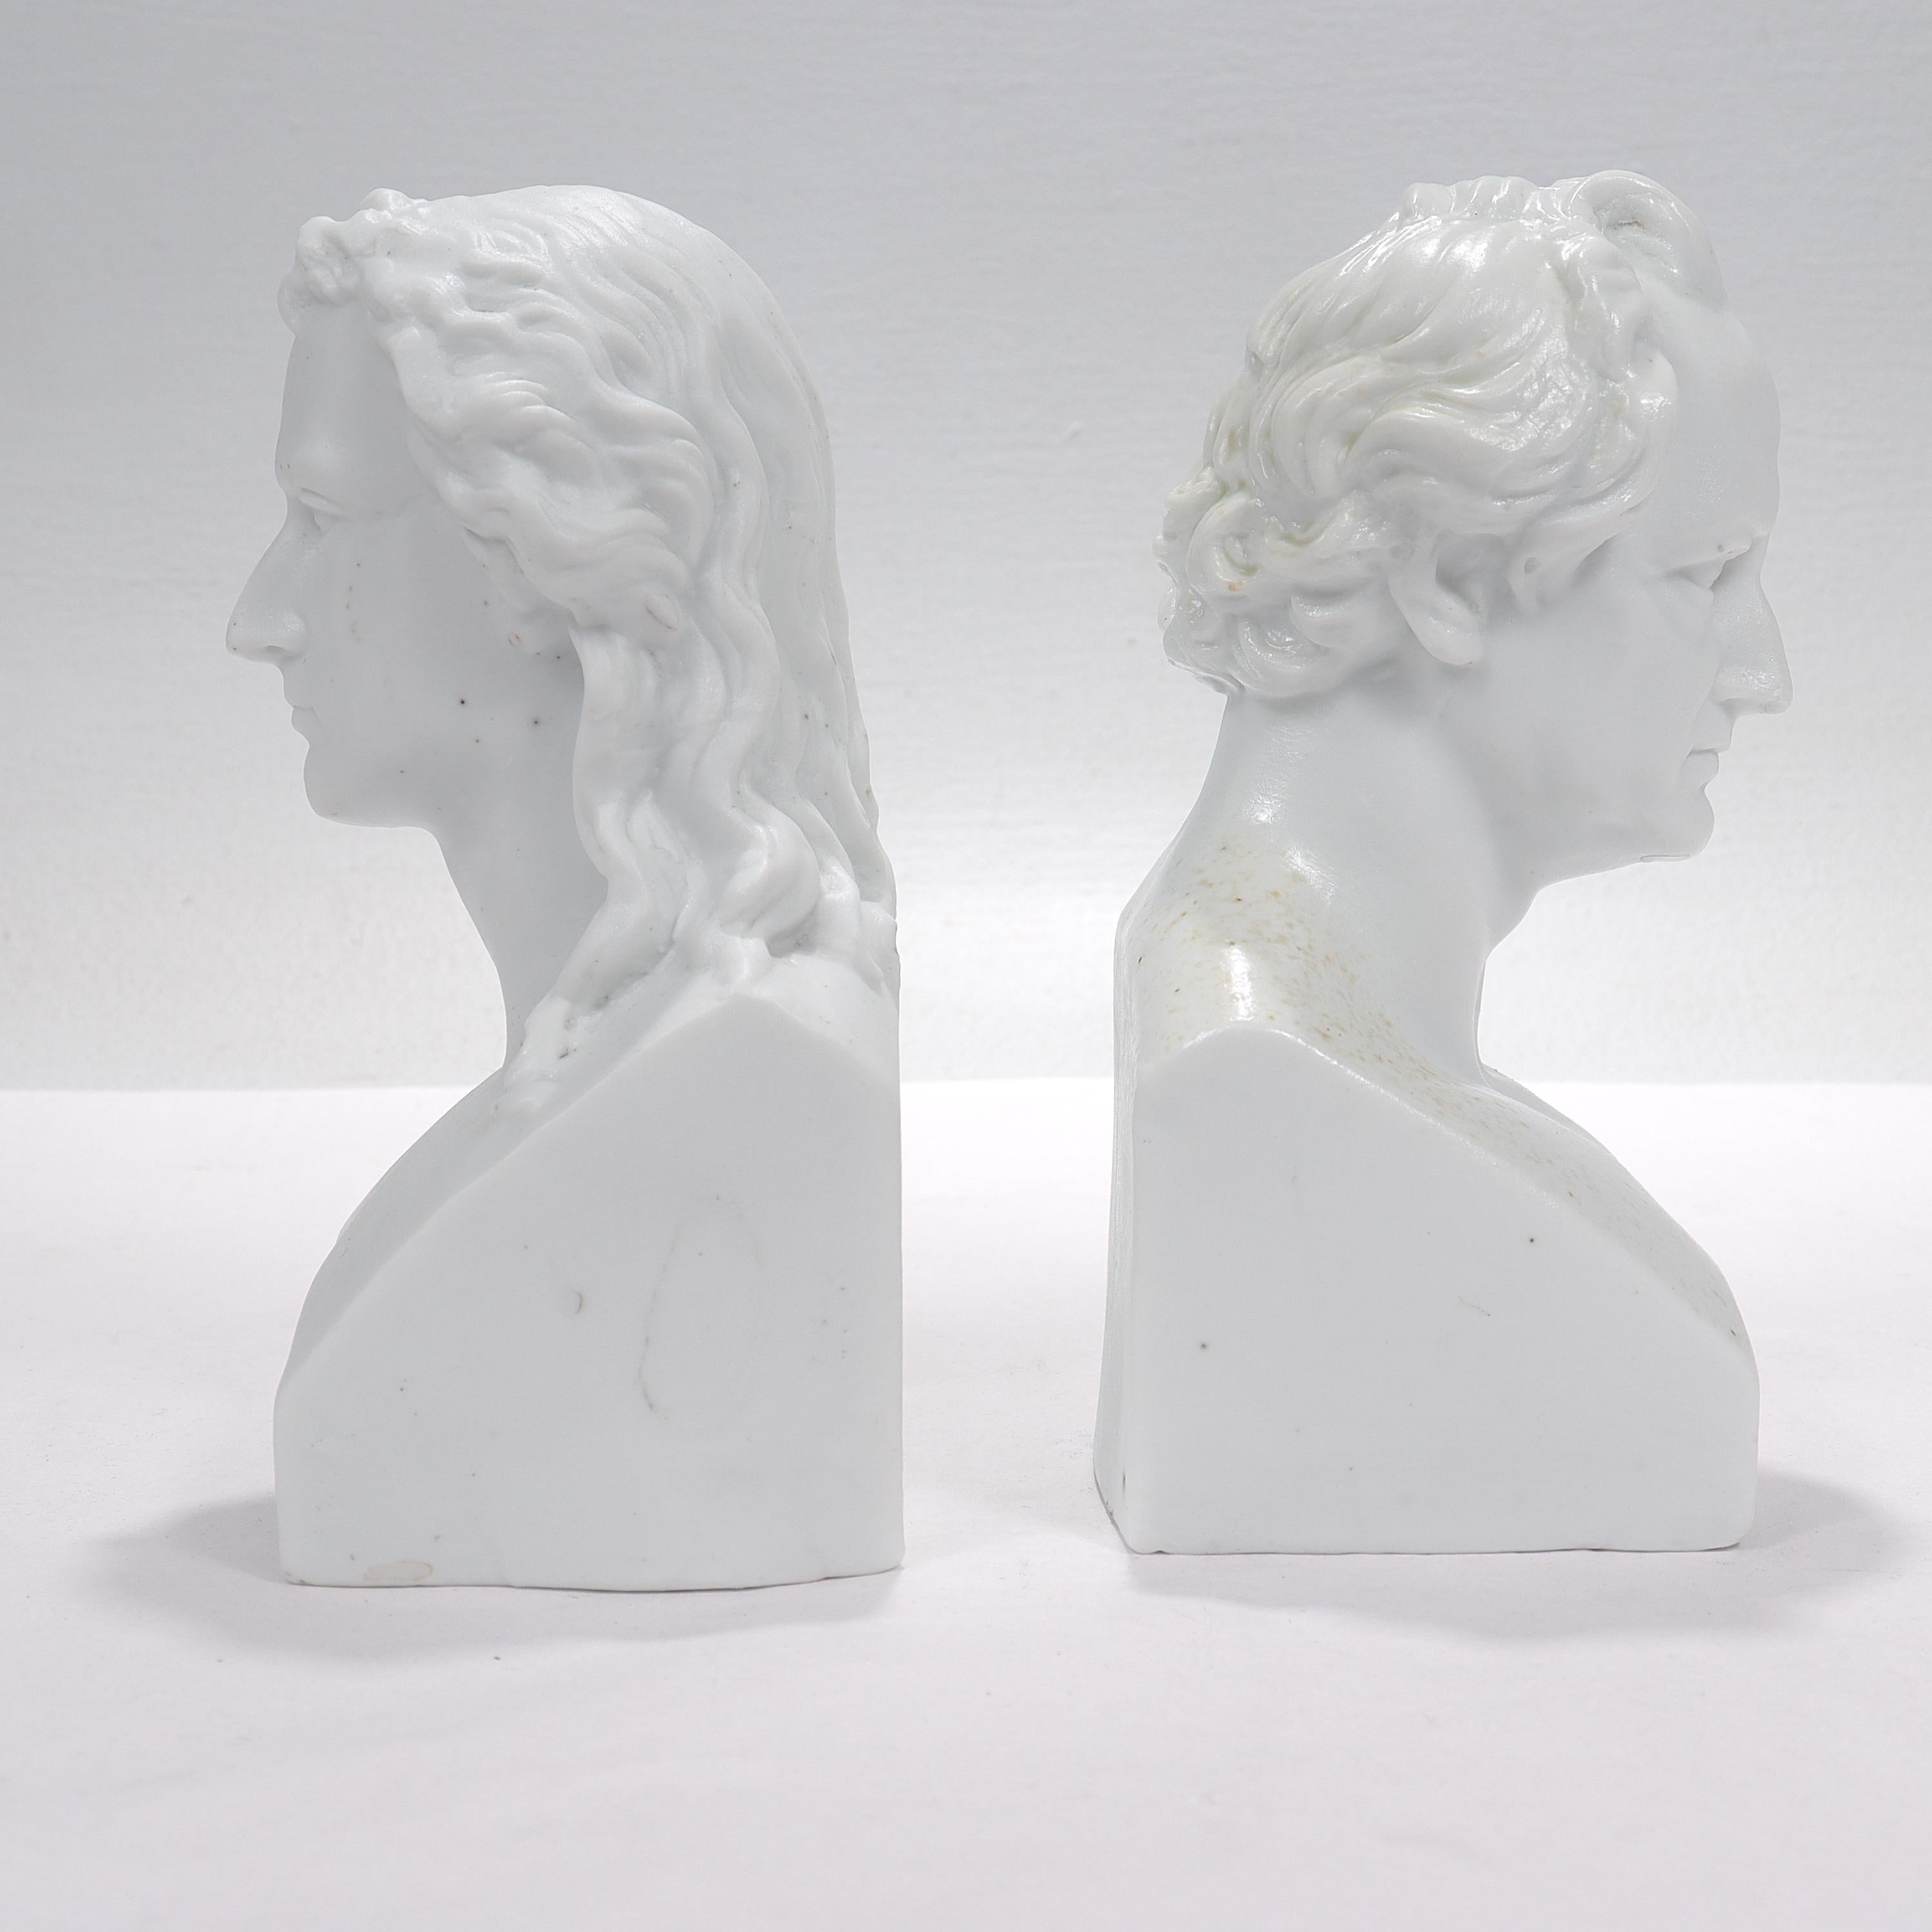 Antique Pair of Victorian Parian or Bisque Porcelain Busts of Schiller & Goethe  For Sale 2